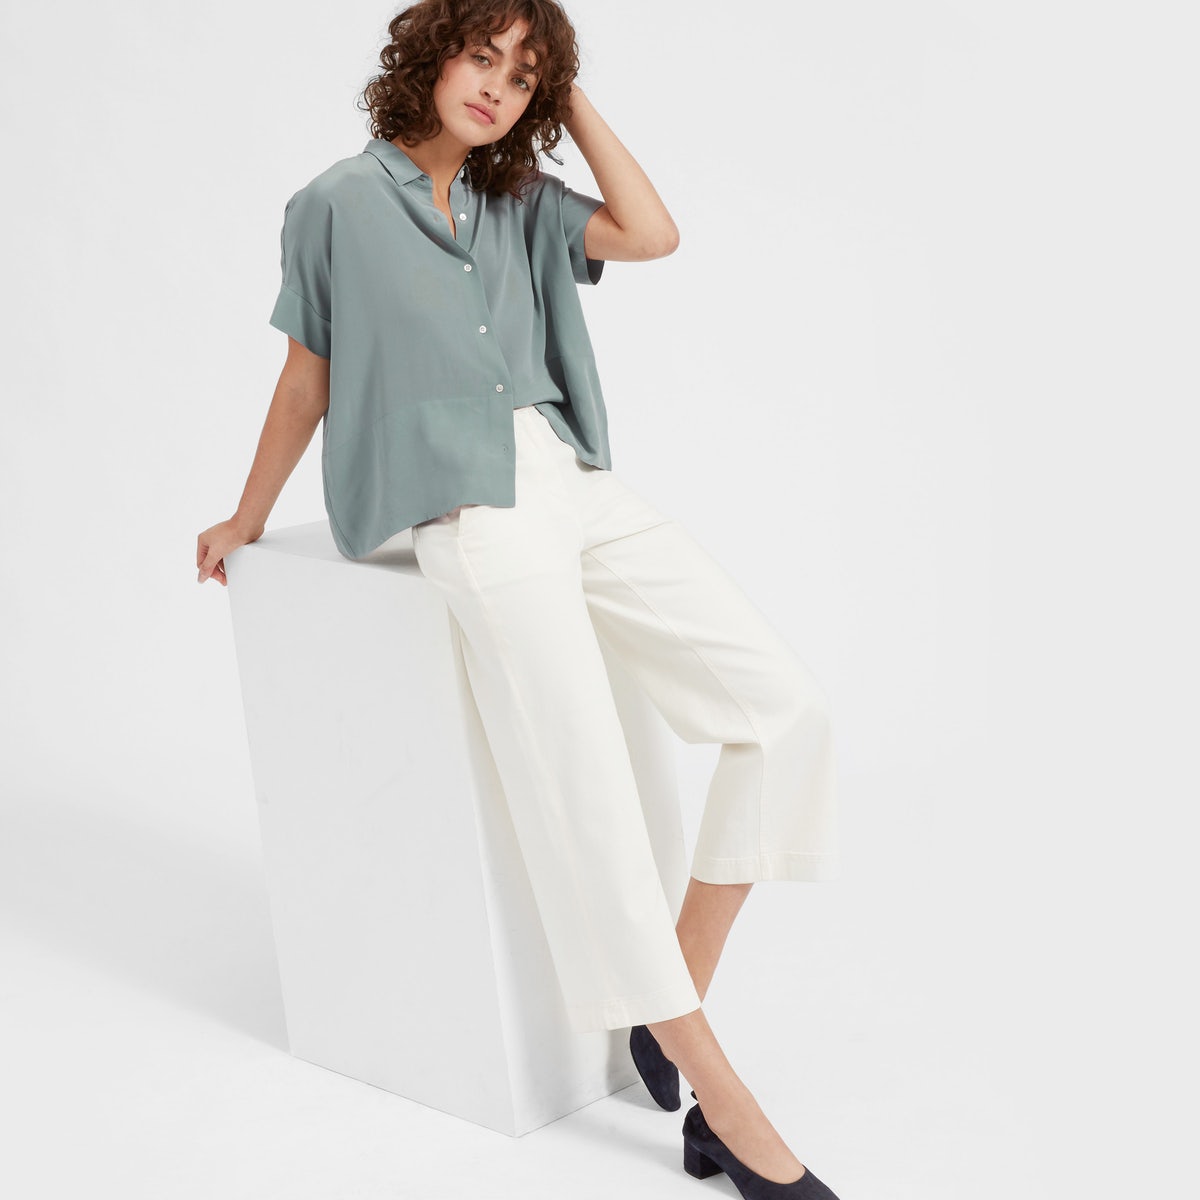 Outfit from Everlane, Four Spring Outfits Using Everlane Clothes